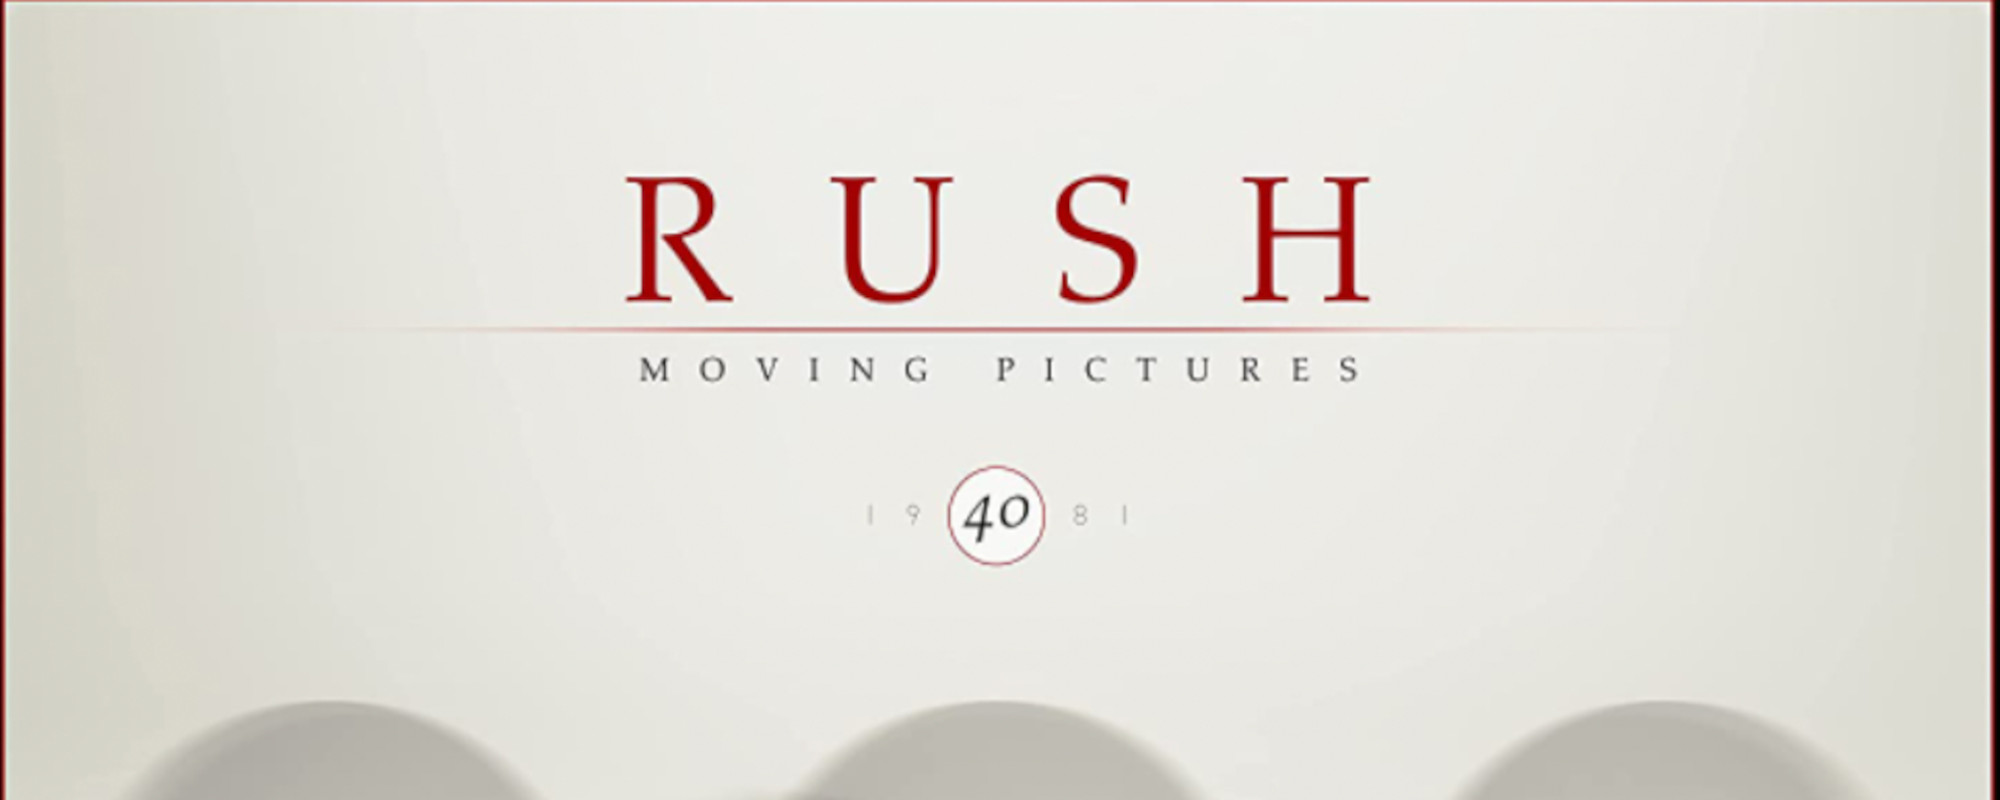 Review: Moving On—The Rush of All Rushes